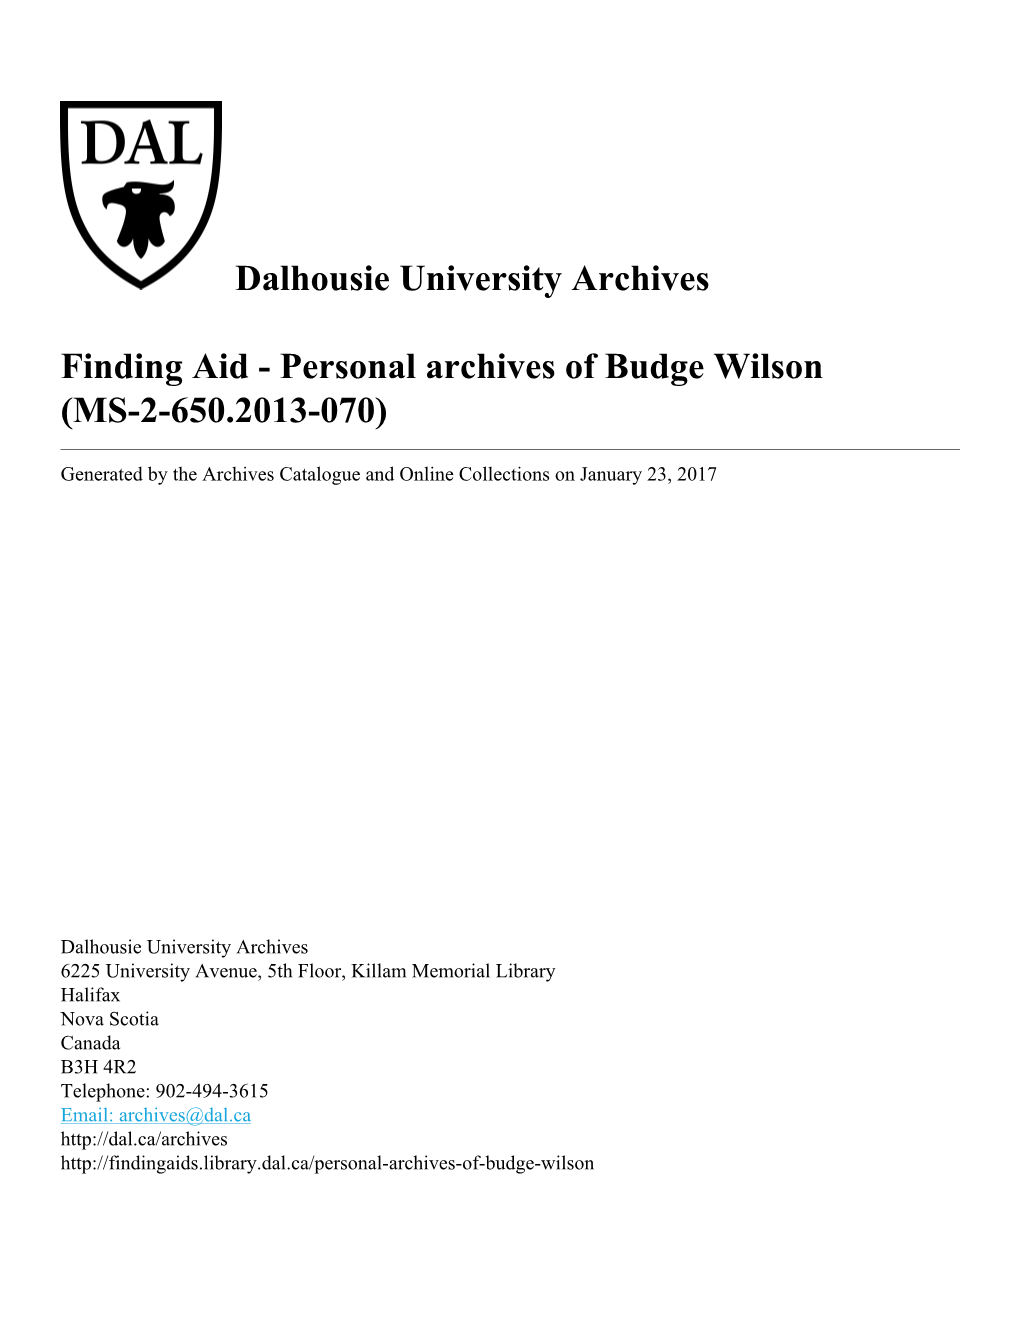 Personal Archives of Budge Wilson (MS-2-650.2013-070)